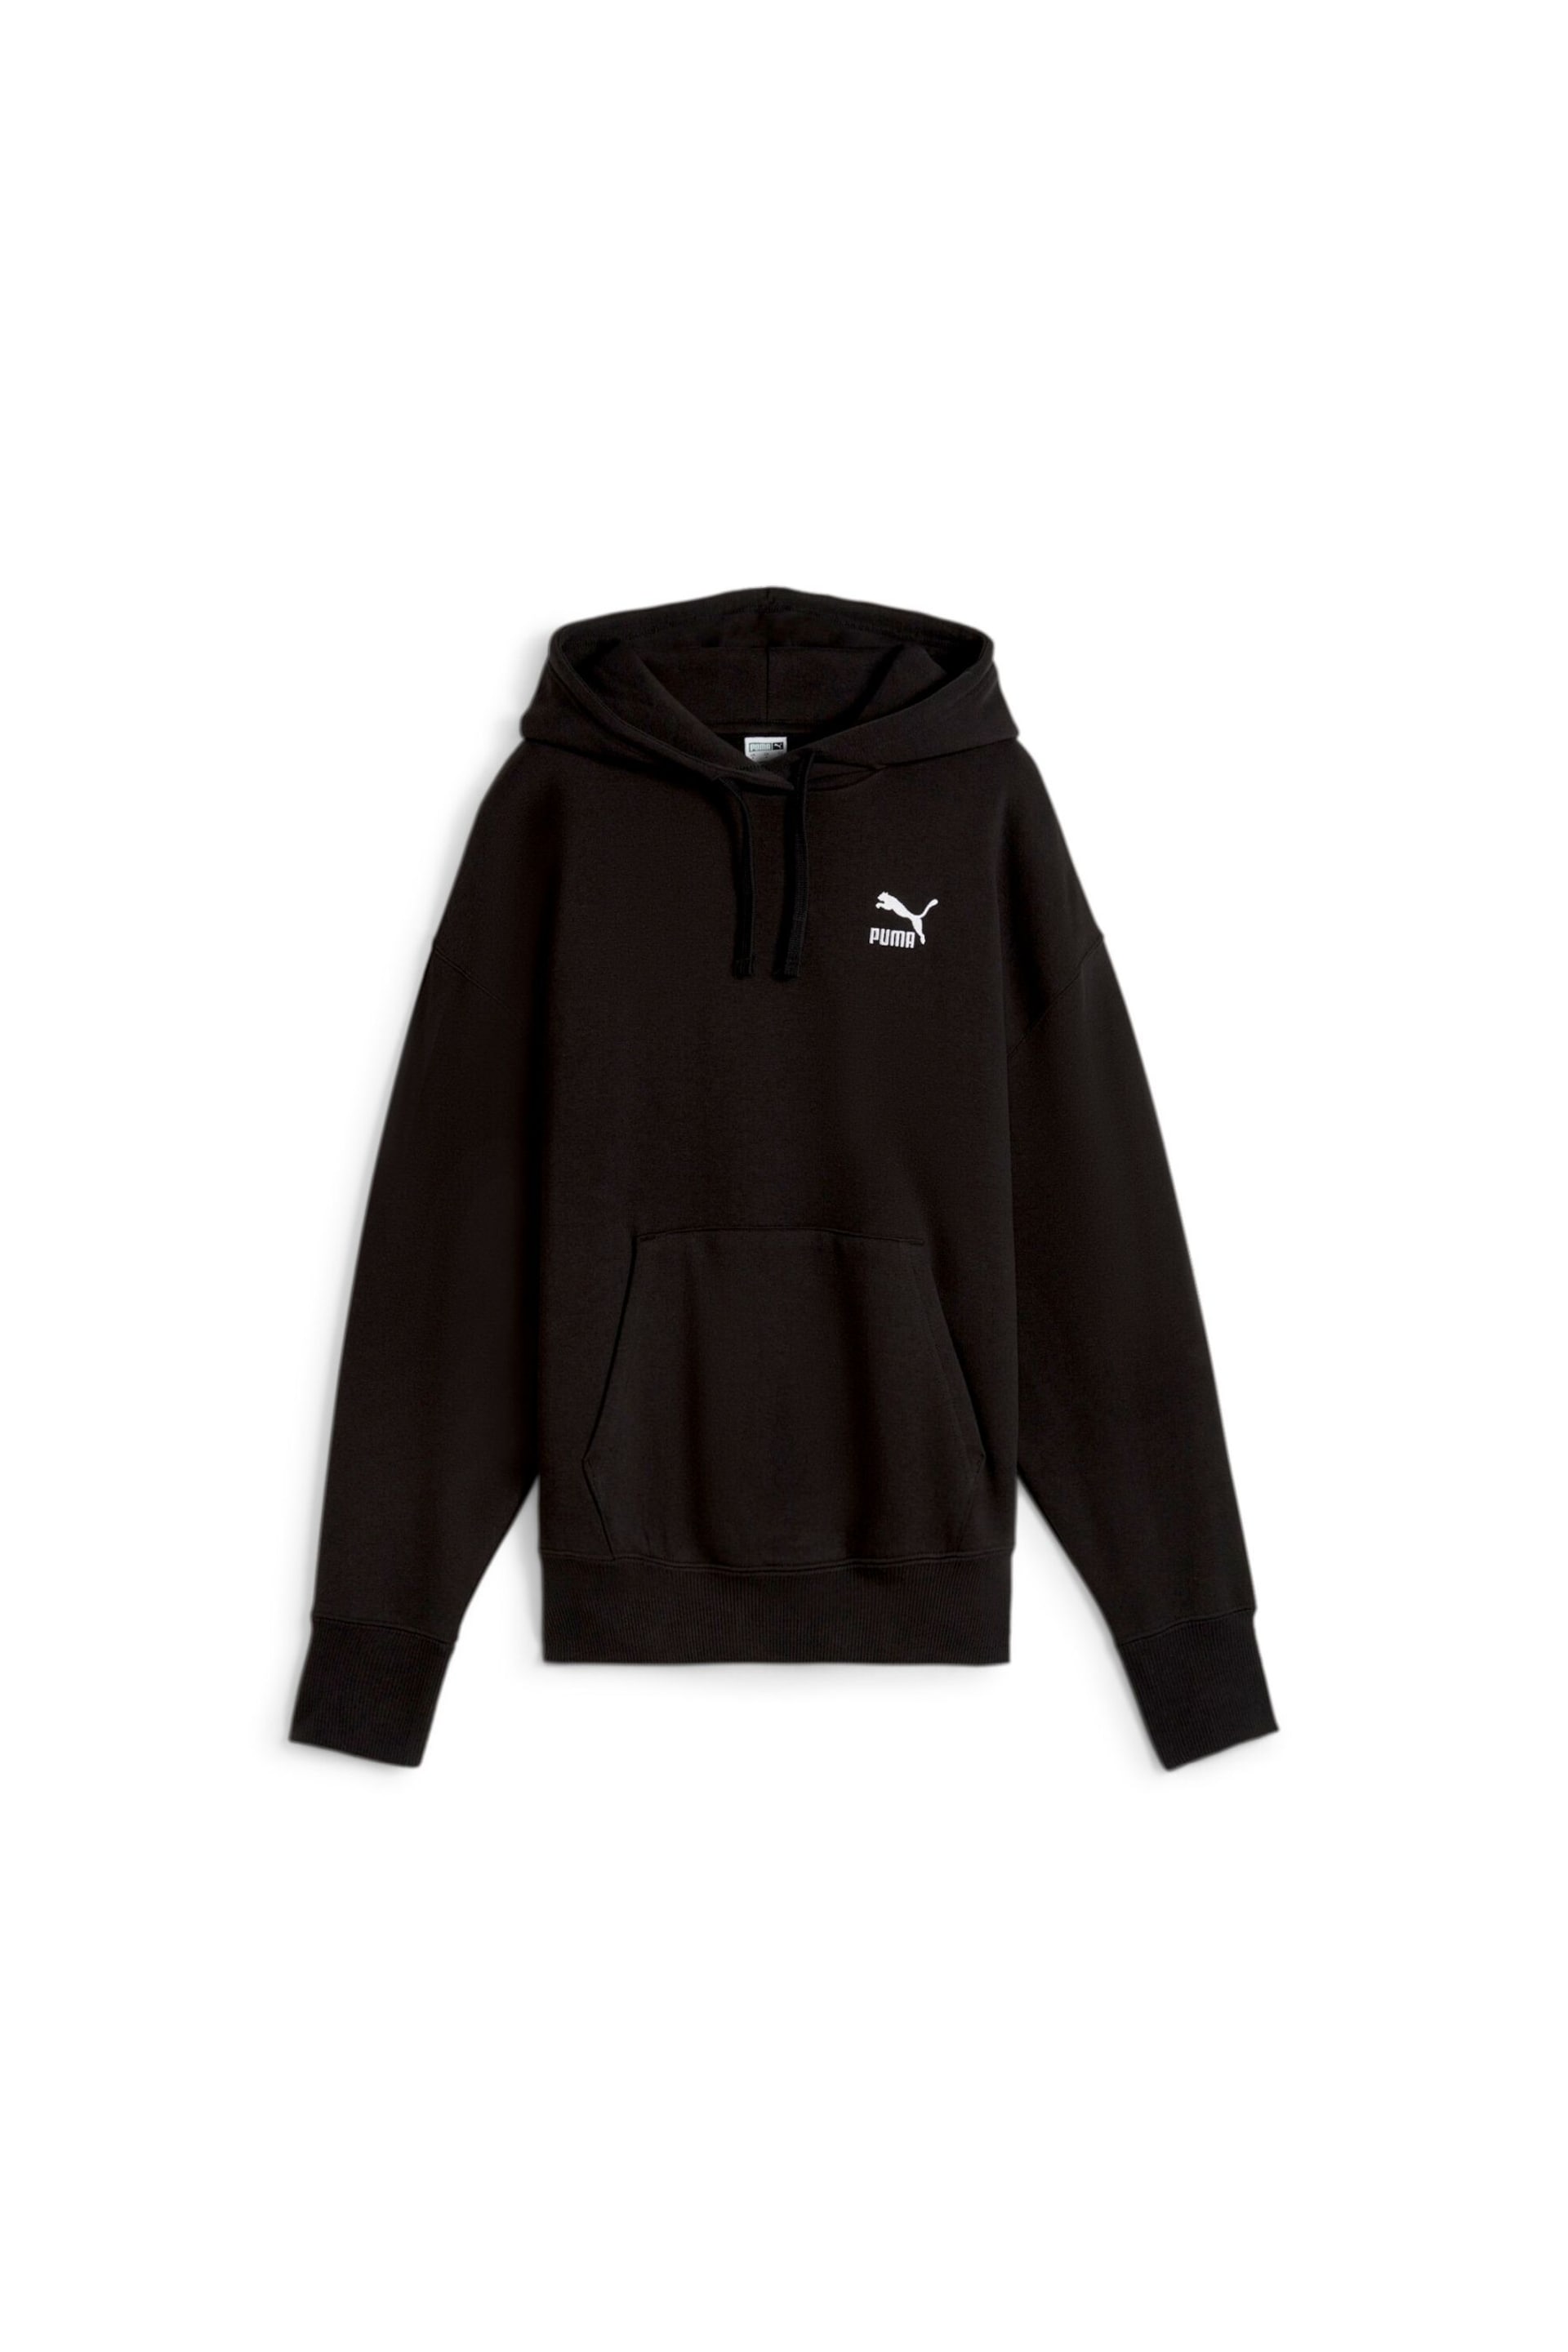 Puma Black Womens Better Classics Relaxed Hoodie - Image 6 of 7